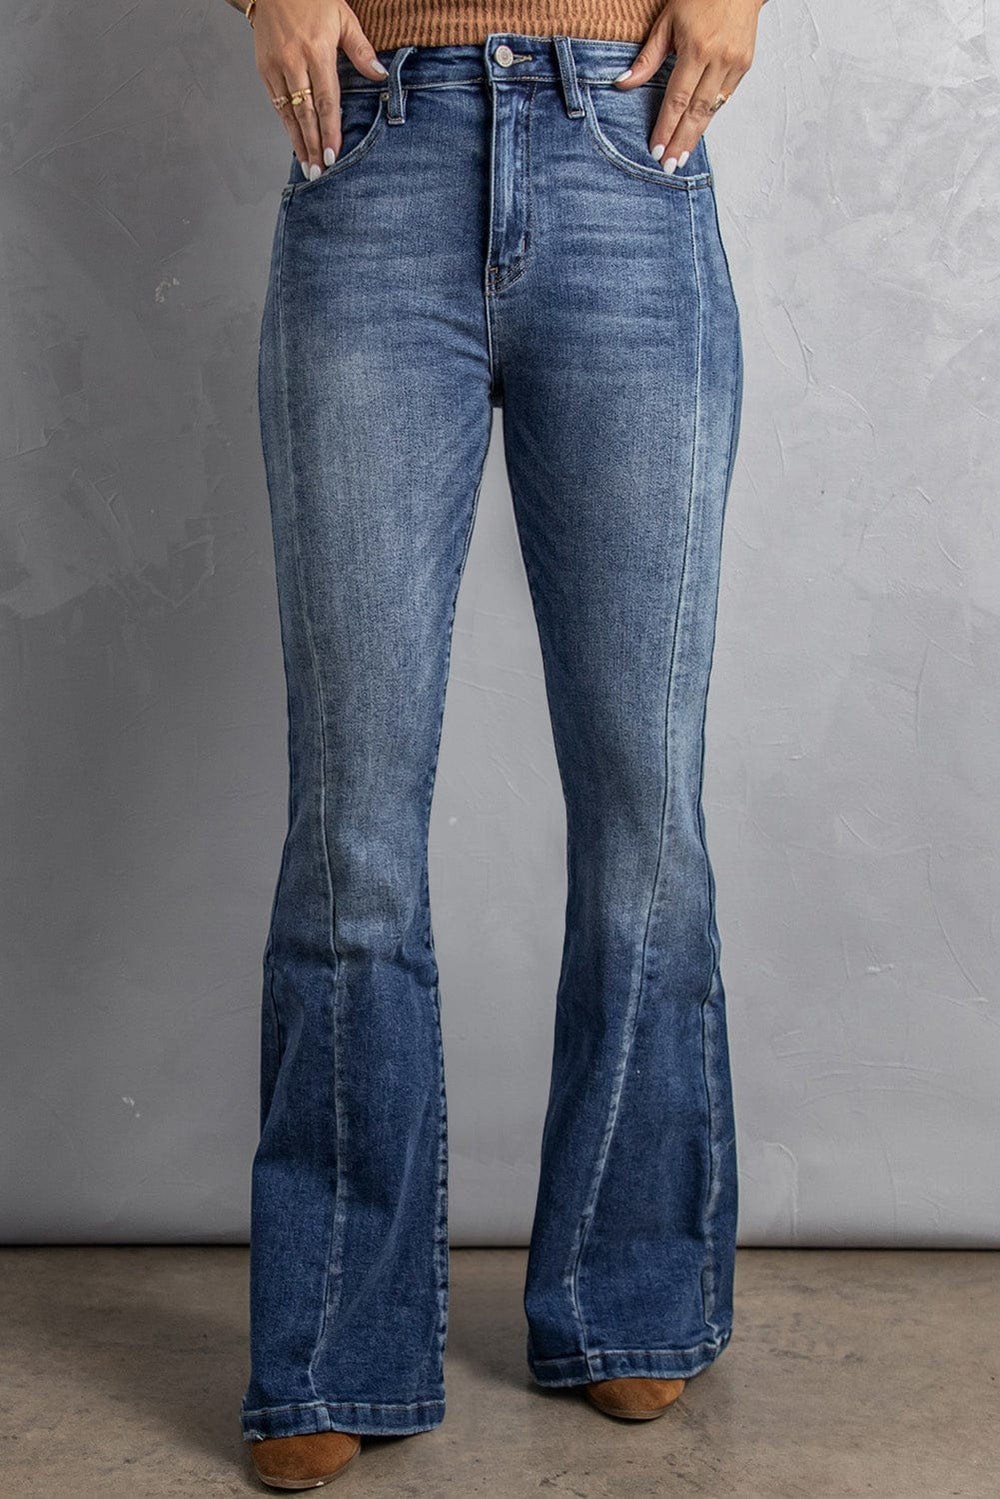 The802Gypsy  Bottoms Blue / 6 / 68%Cotton+30%Rayon+2%Elastane TRAVELING GYPSY-High Waist Flare Jeans with Pockets